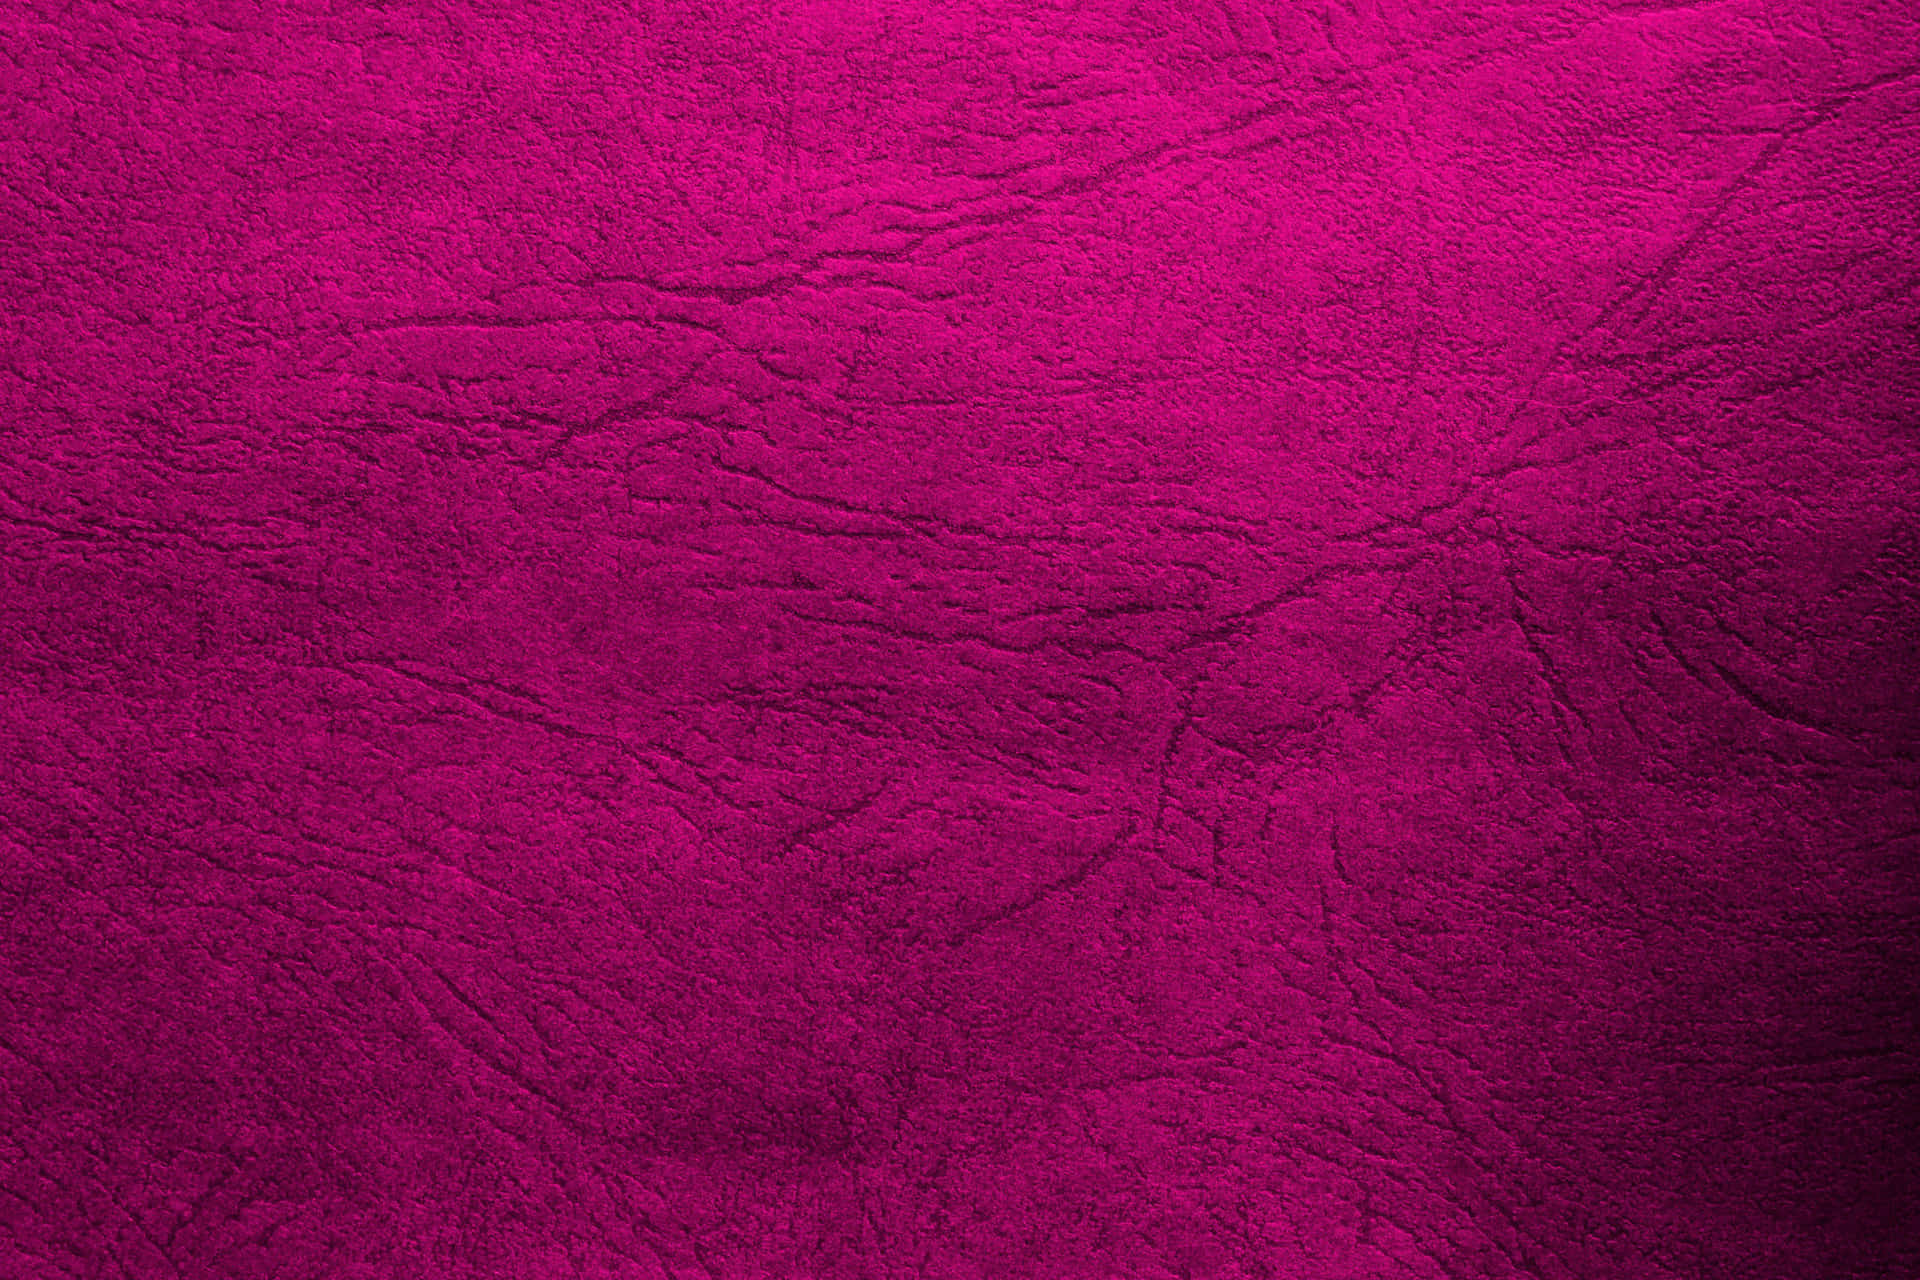 A Close Up Of A Pink Leather Texture